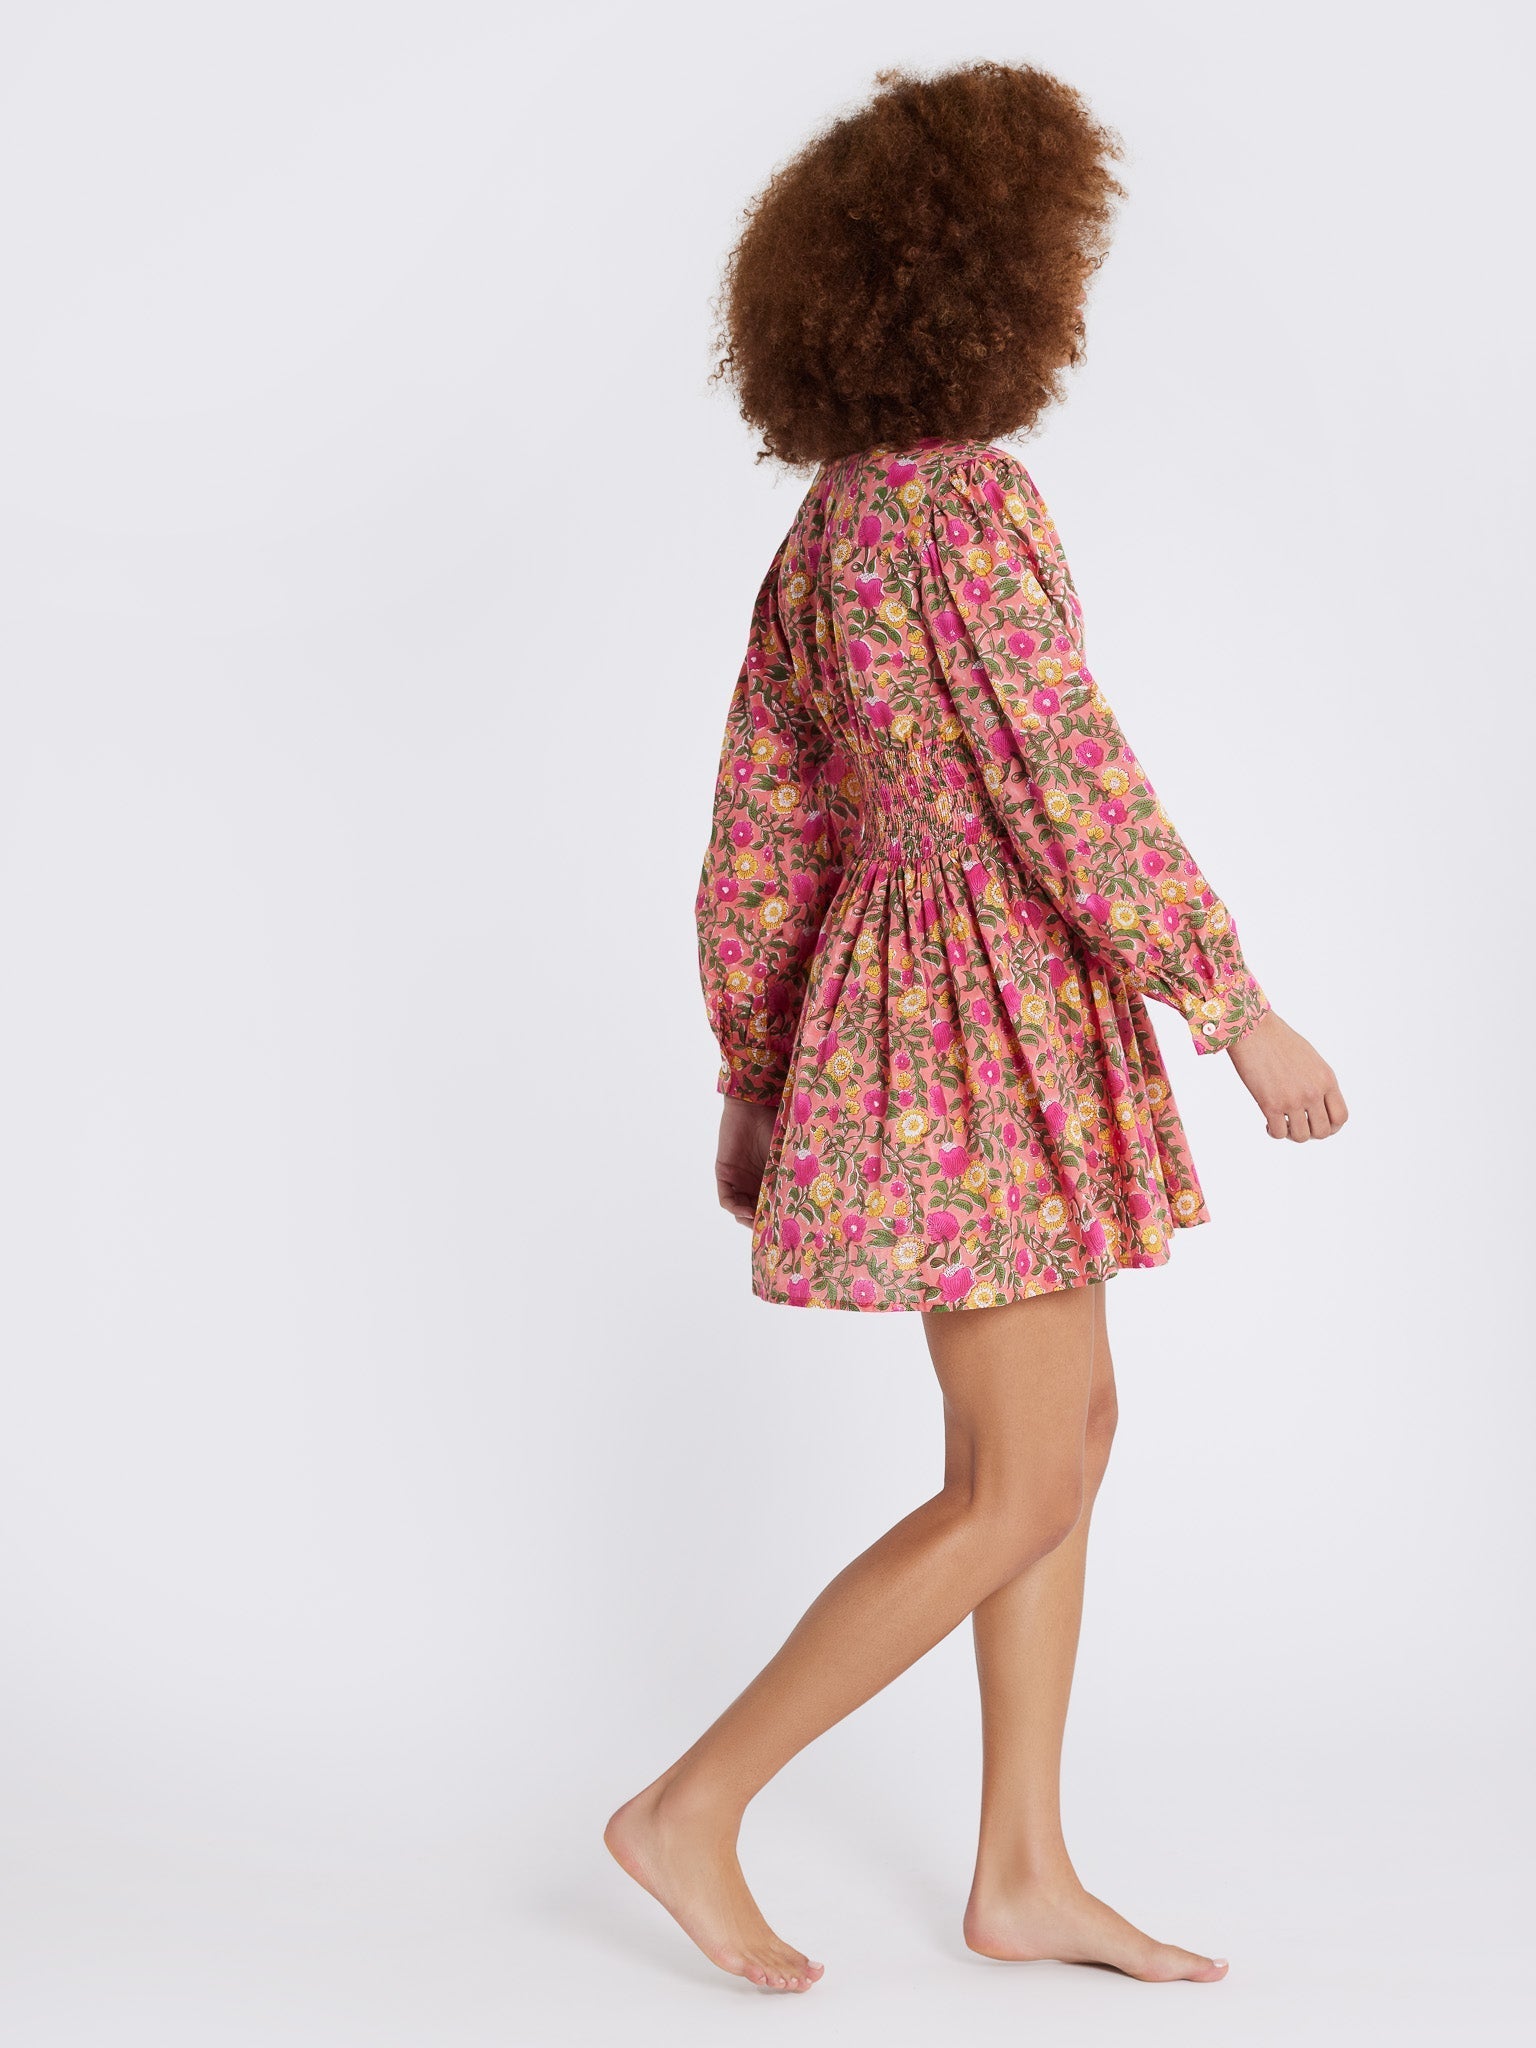 MILLE Clothing Claudia Dress in Passionfruit